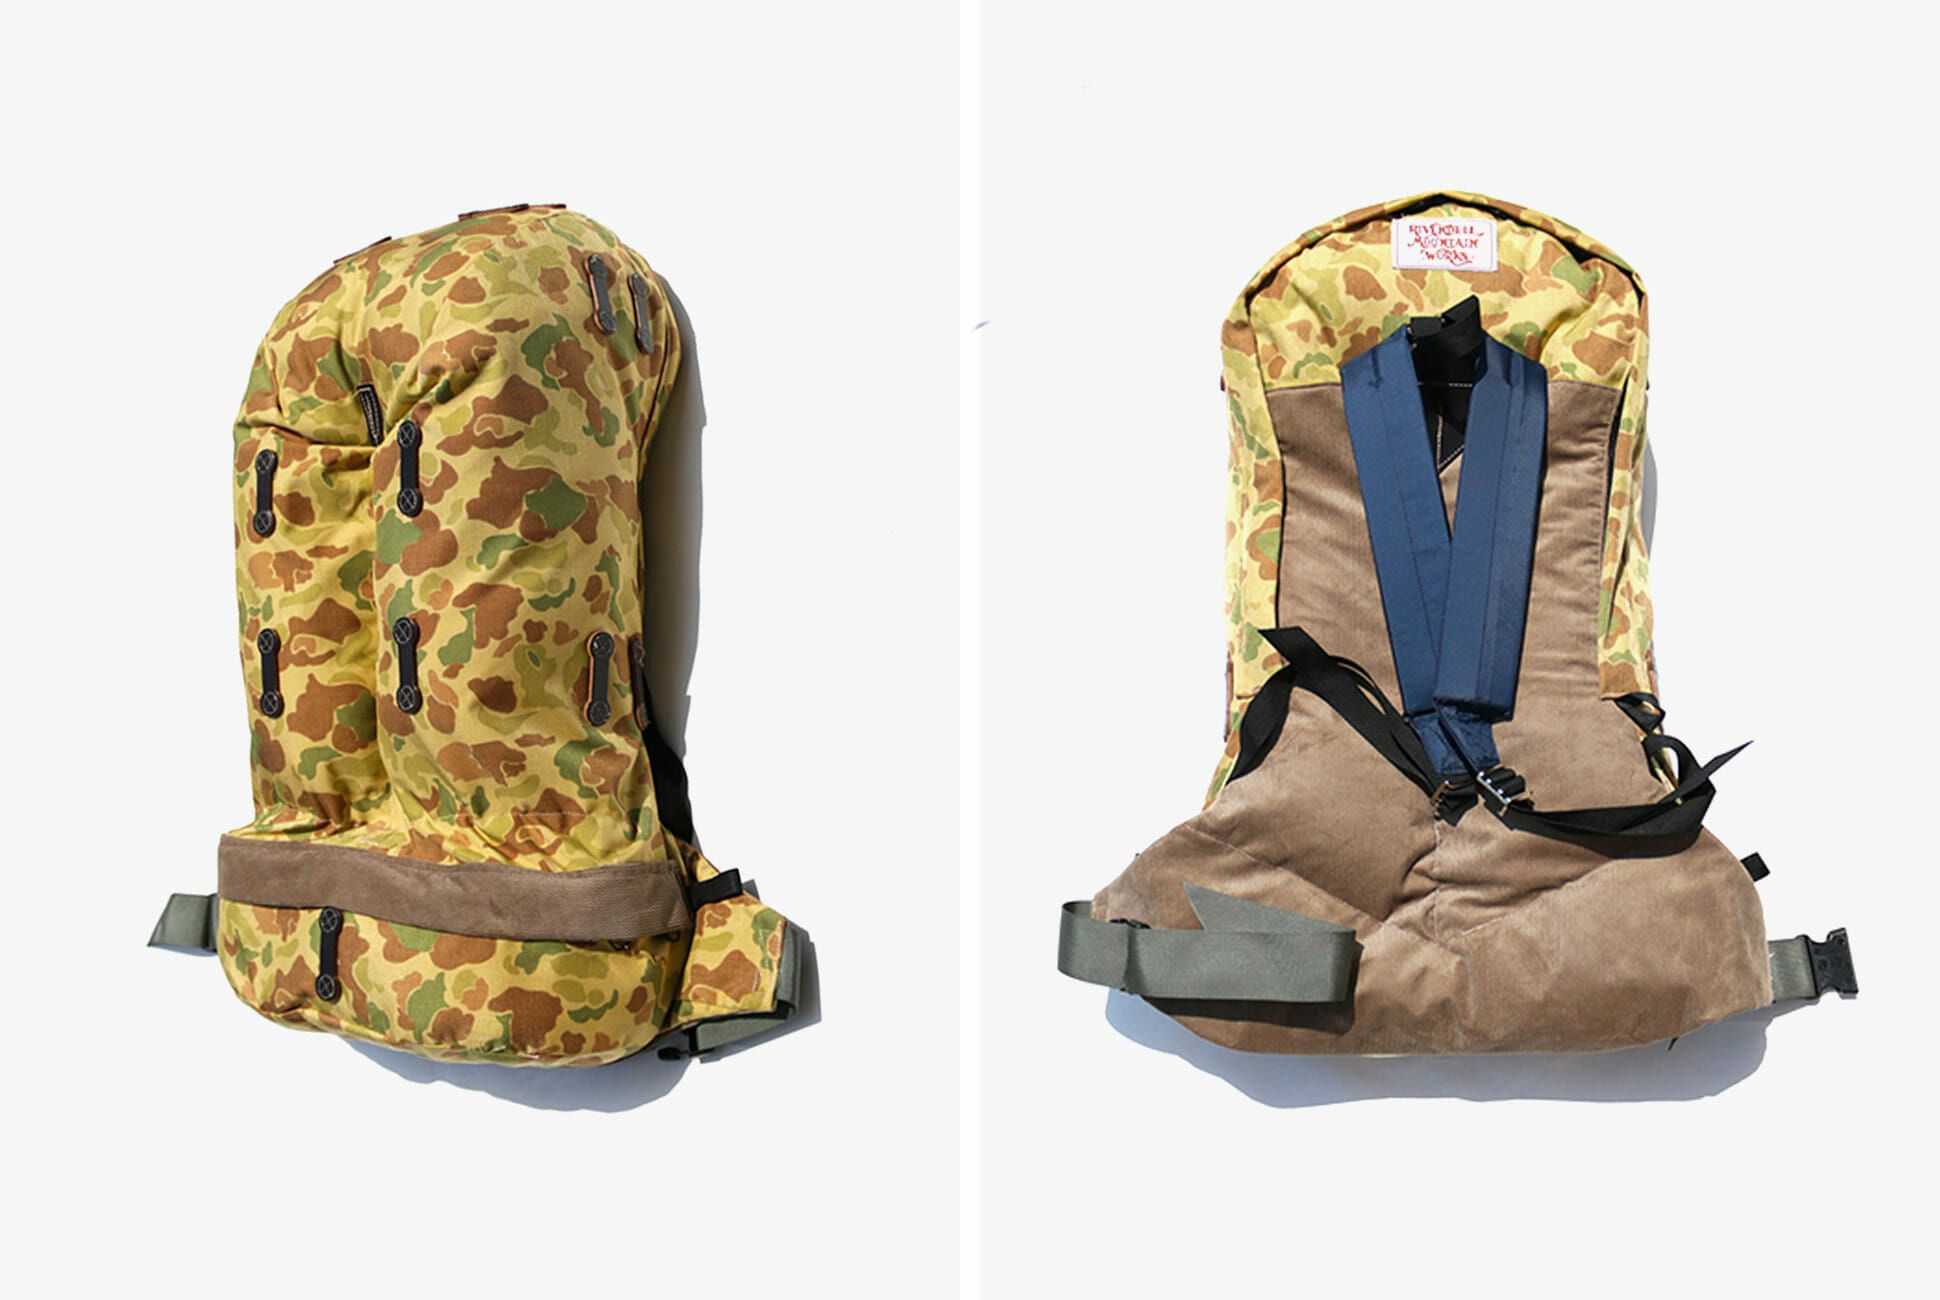 Like Retro Outdoor Gear? Look to Japan (and This Backpack)